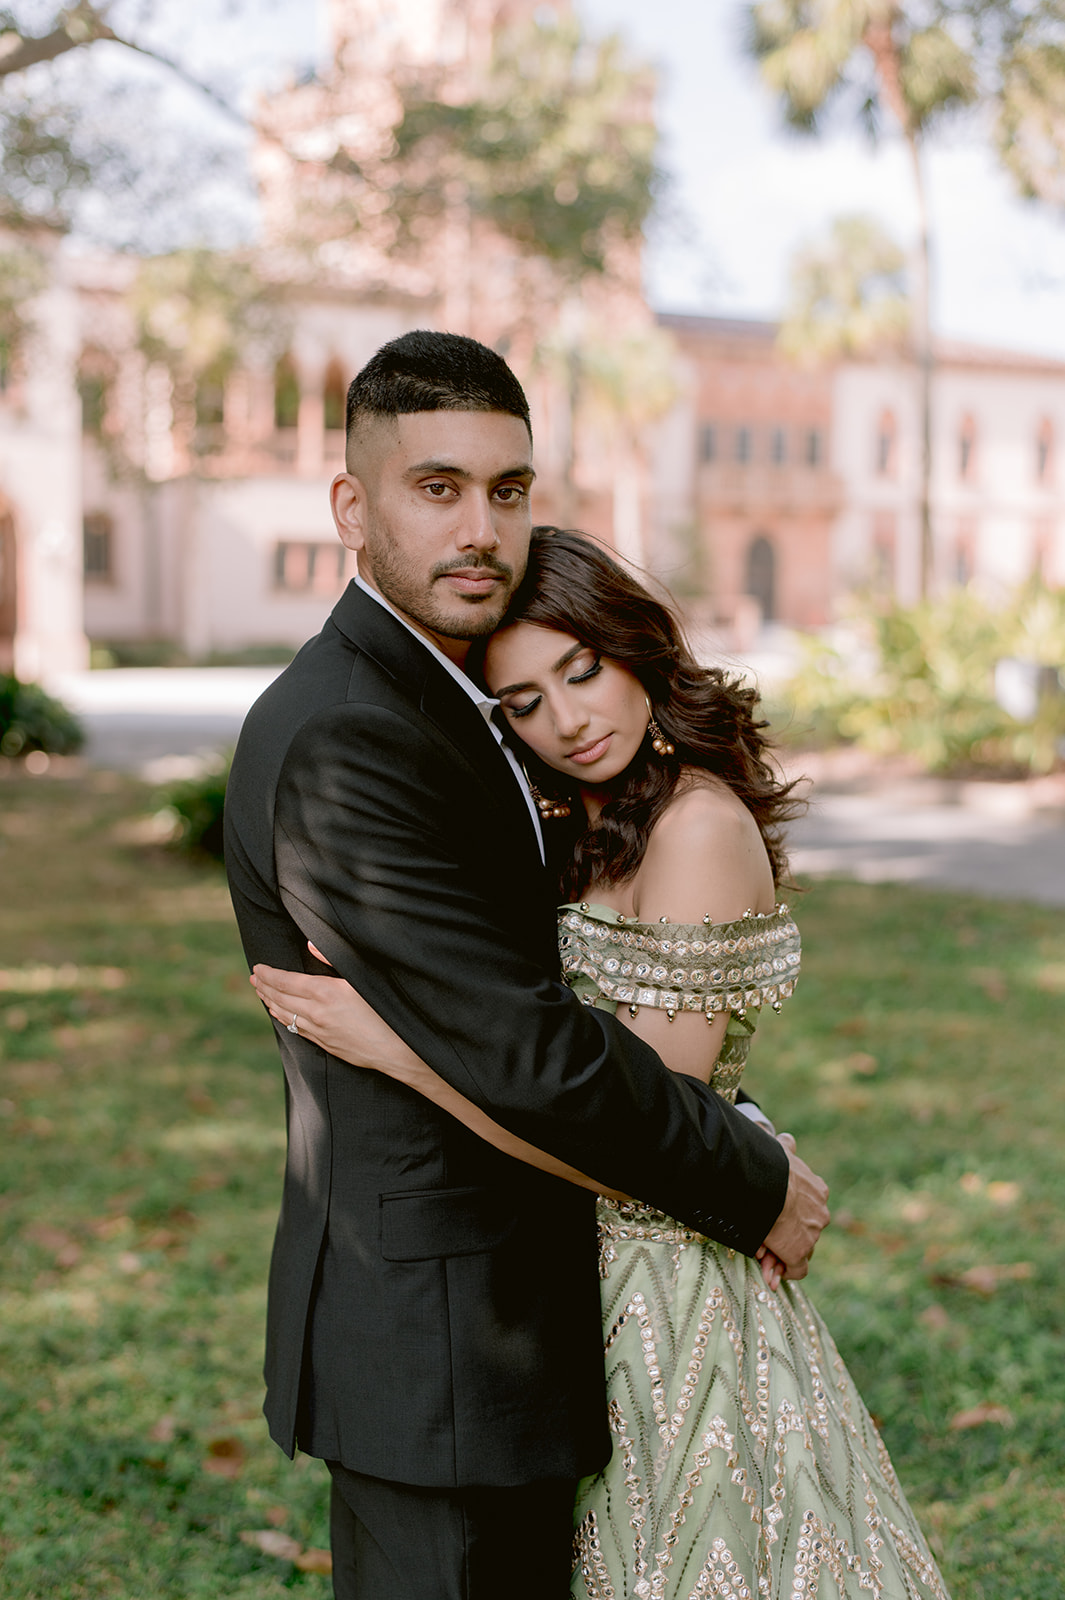 "Romantic engagement session at the John and Mable Ringling Museum with Indian couple"
